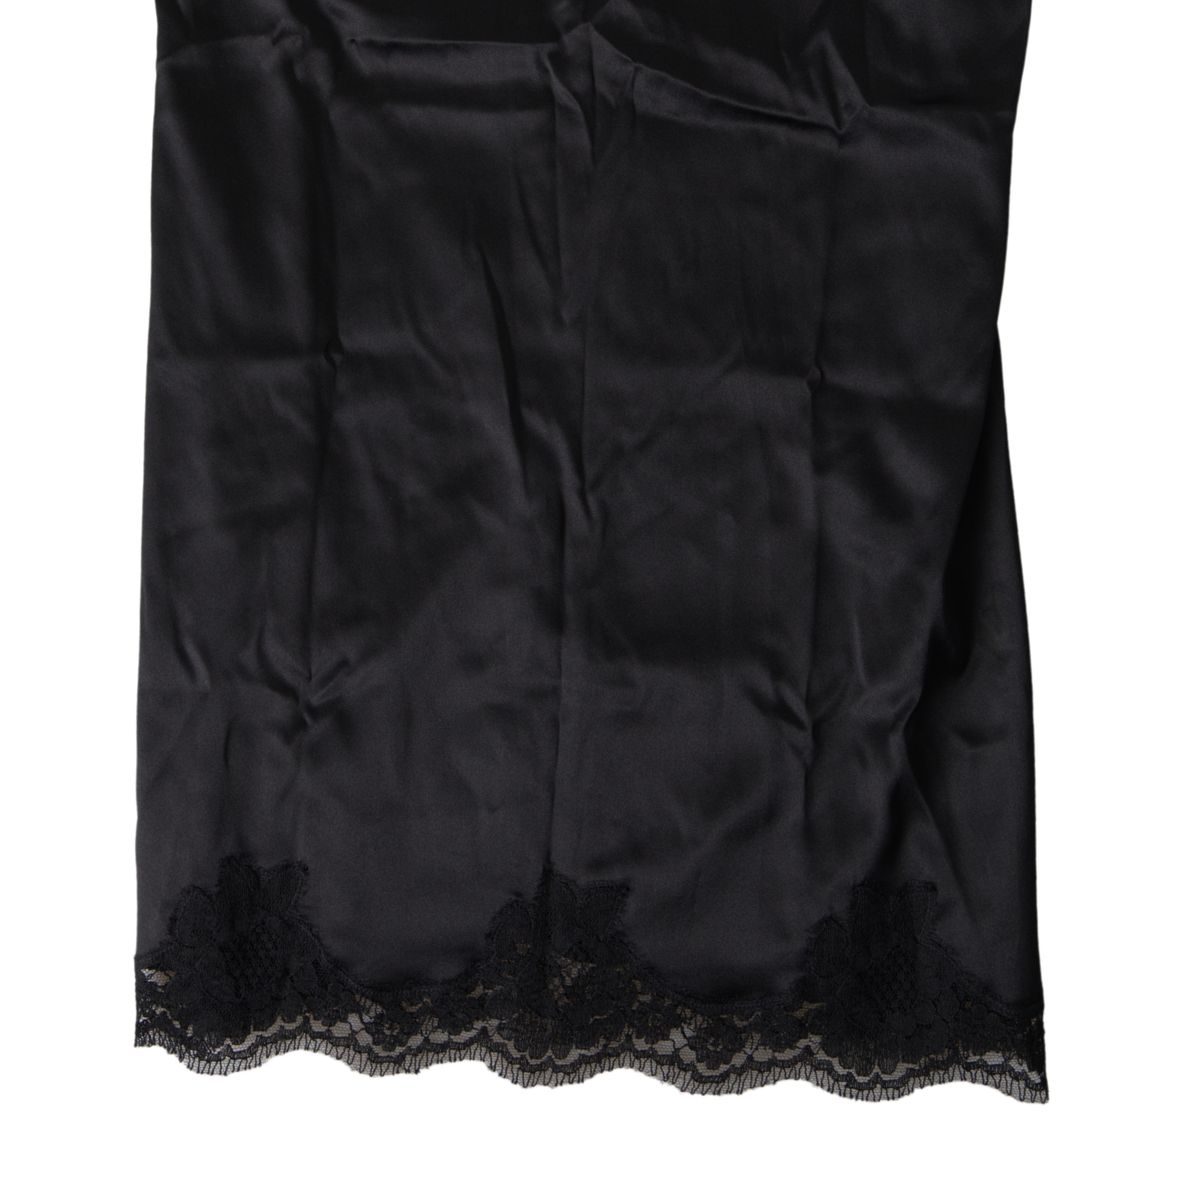 Sultry Black Silk Camisole Top